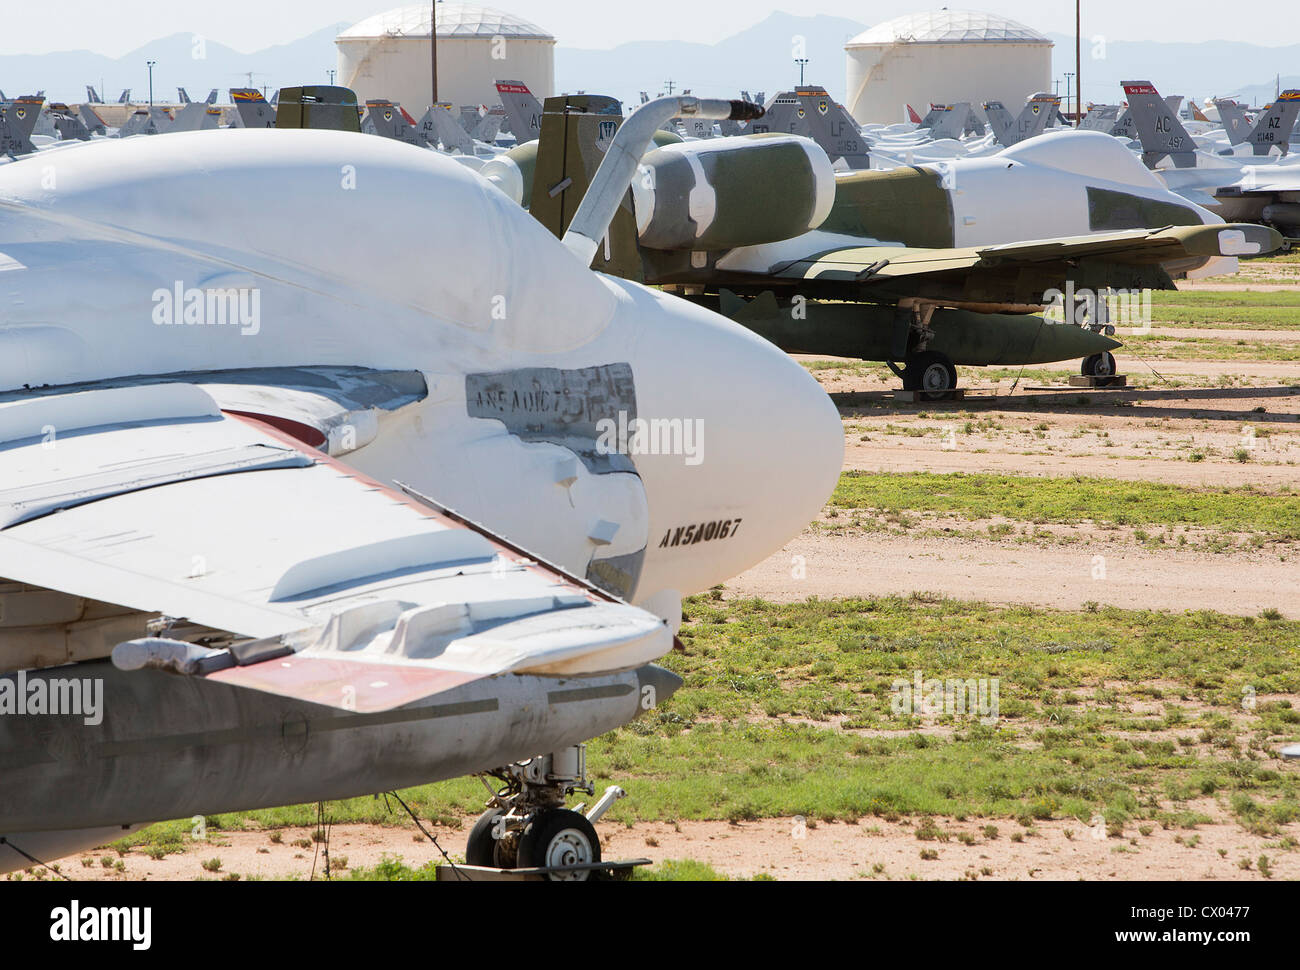 A-6 Intruder aircraft in storage at the 309th Aerospace Maintenance and Regeneration Group at Davis-Monthan Air Force Base. Stock Photo